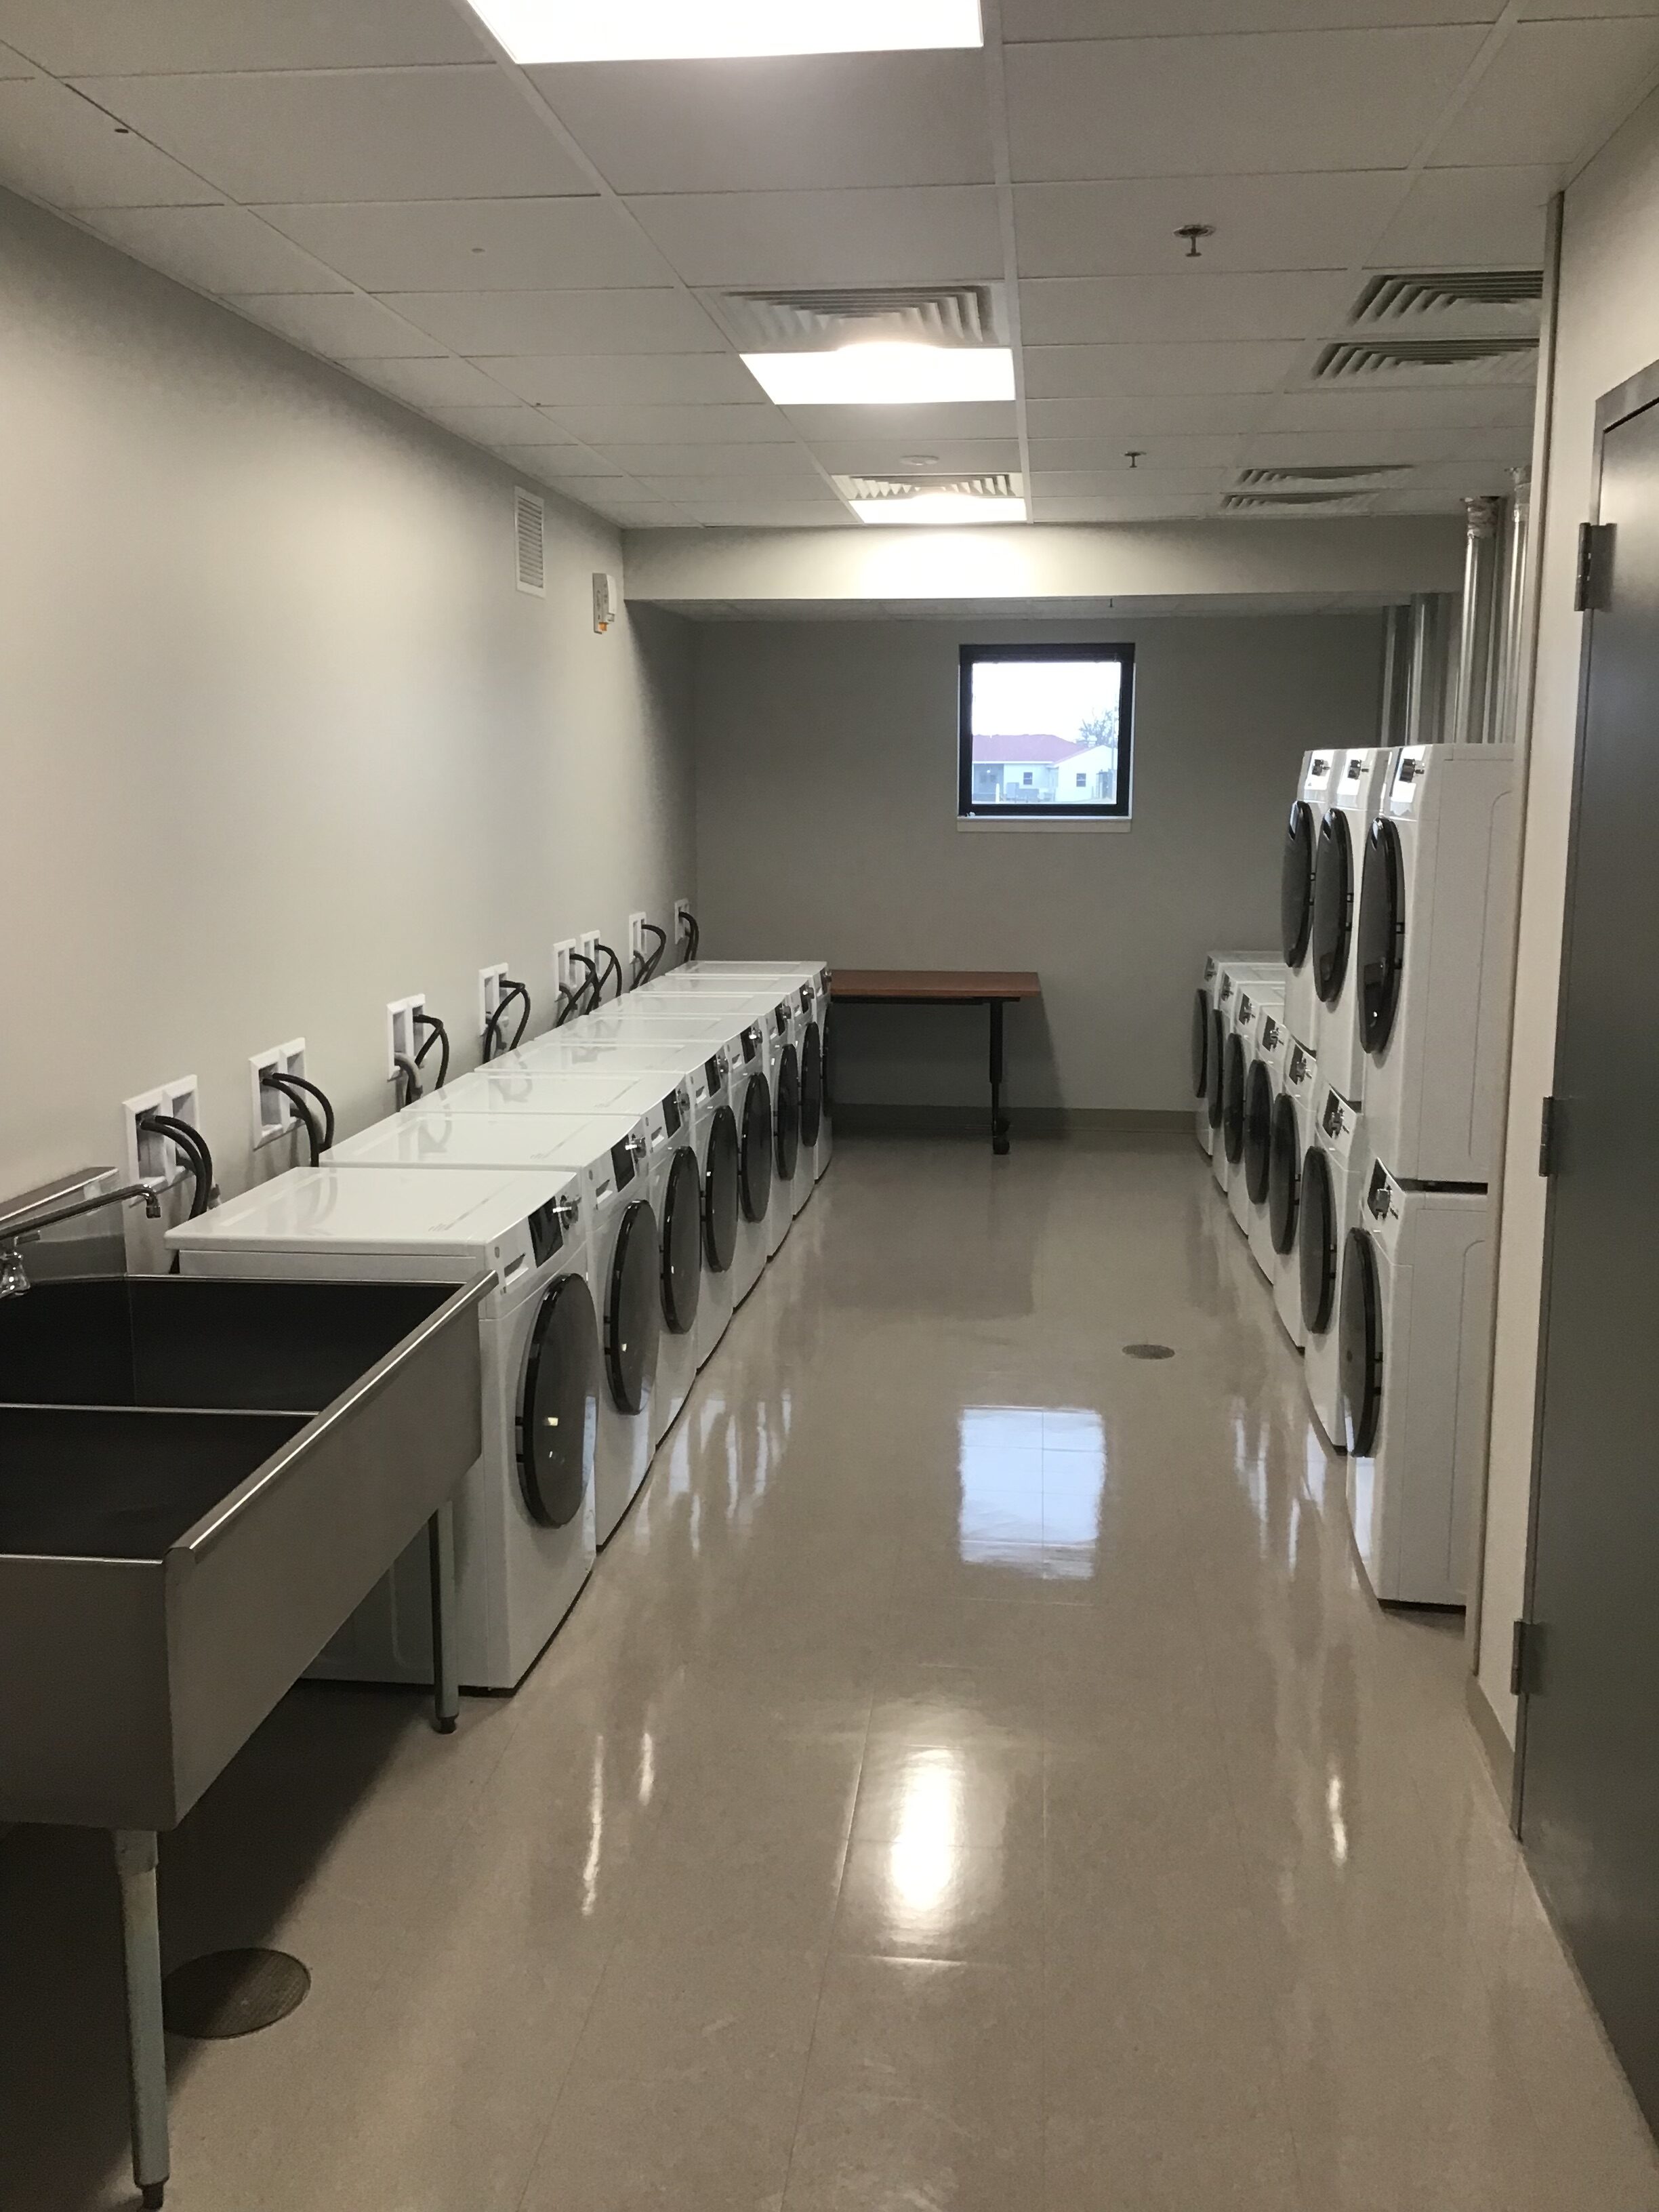 FY19 Laundry Room Rotated 